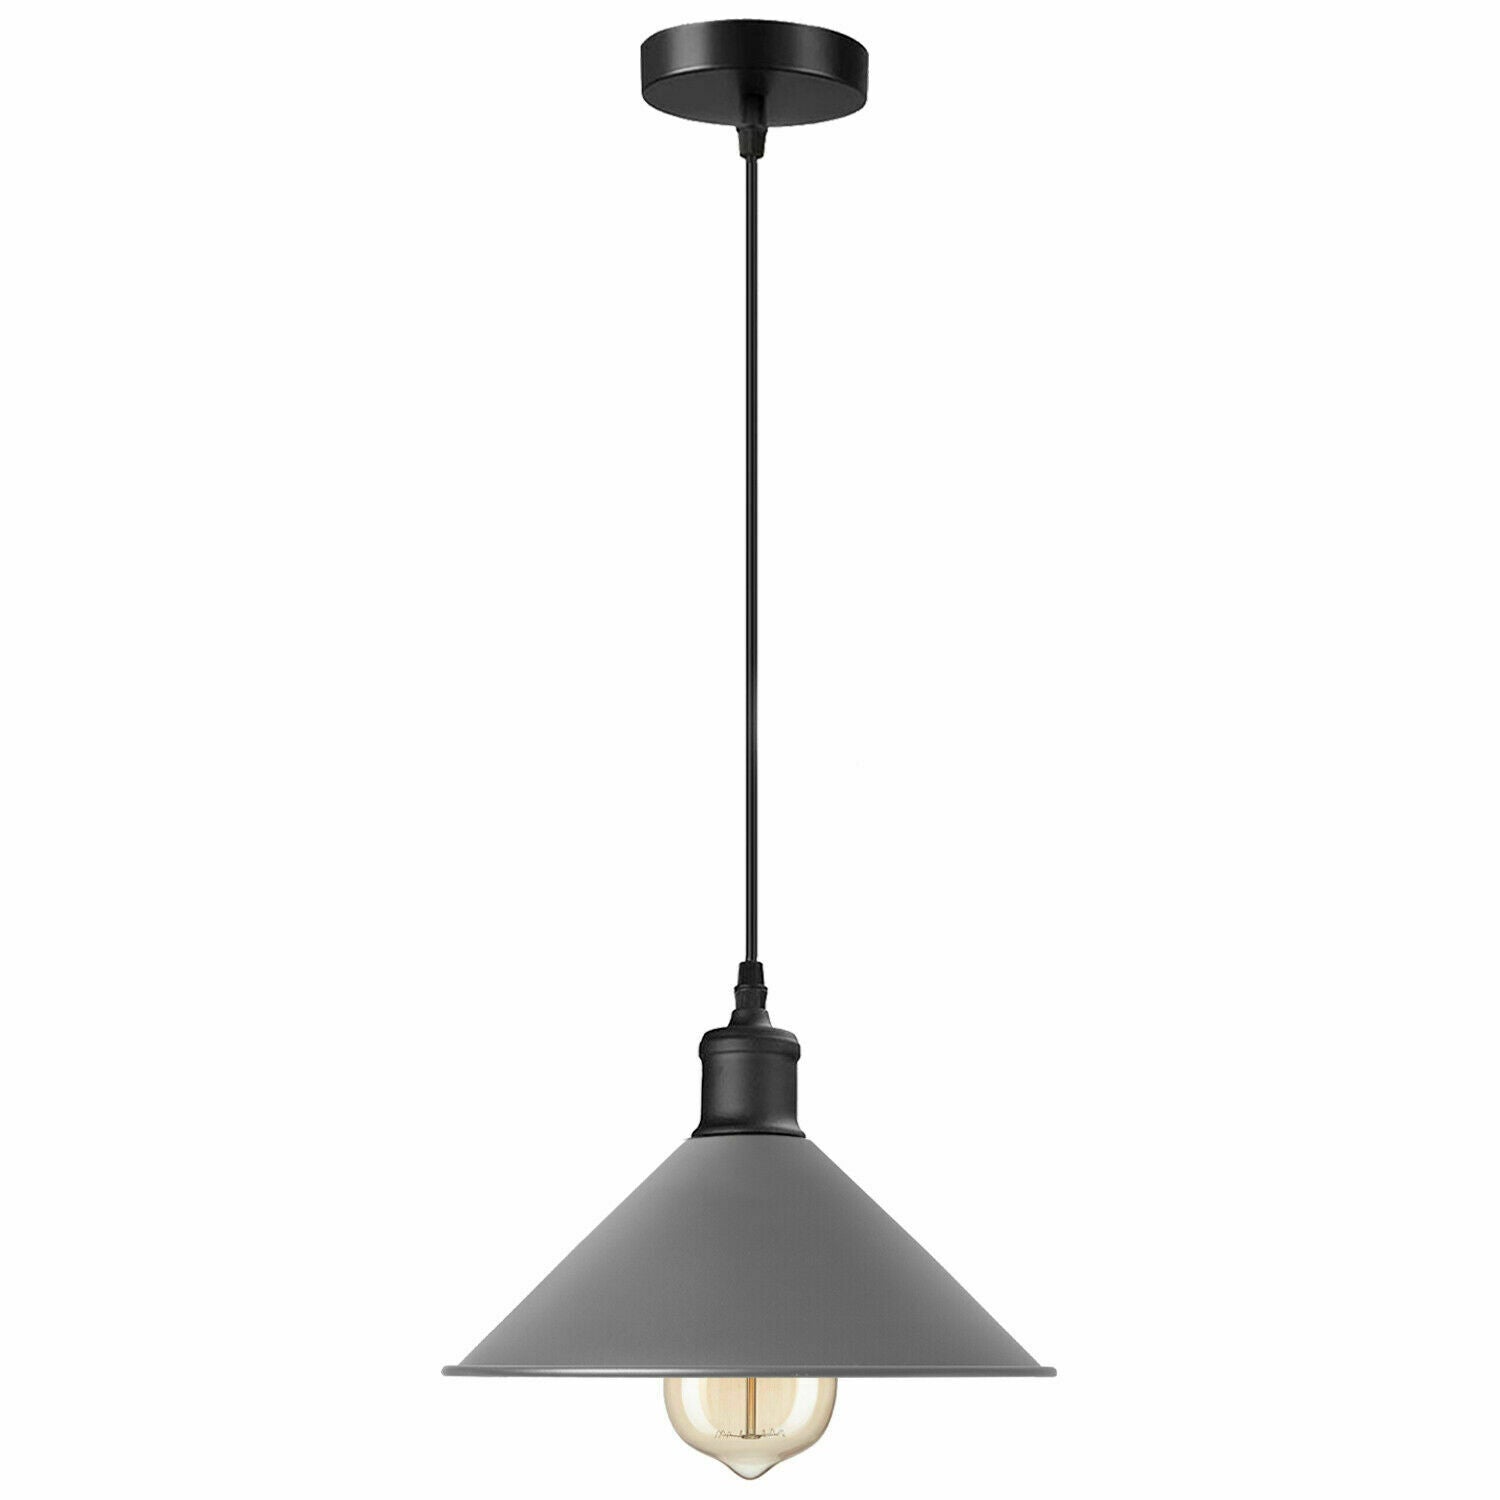 44 Inch Industrial Modern Cone Ceiling Pendant Lighting